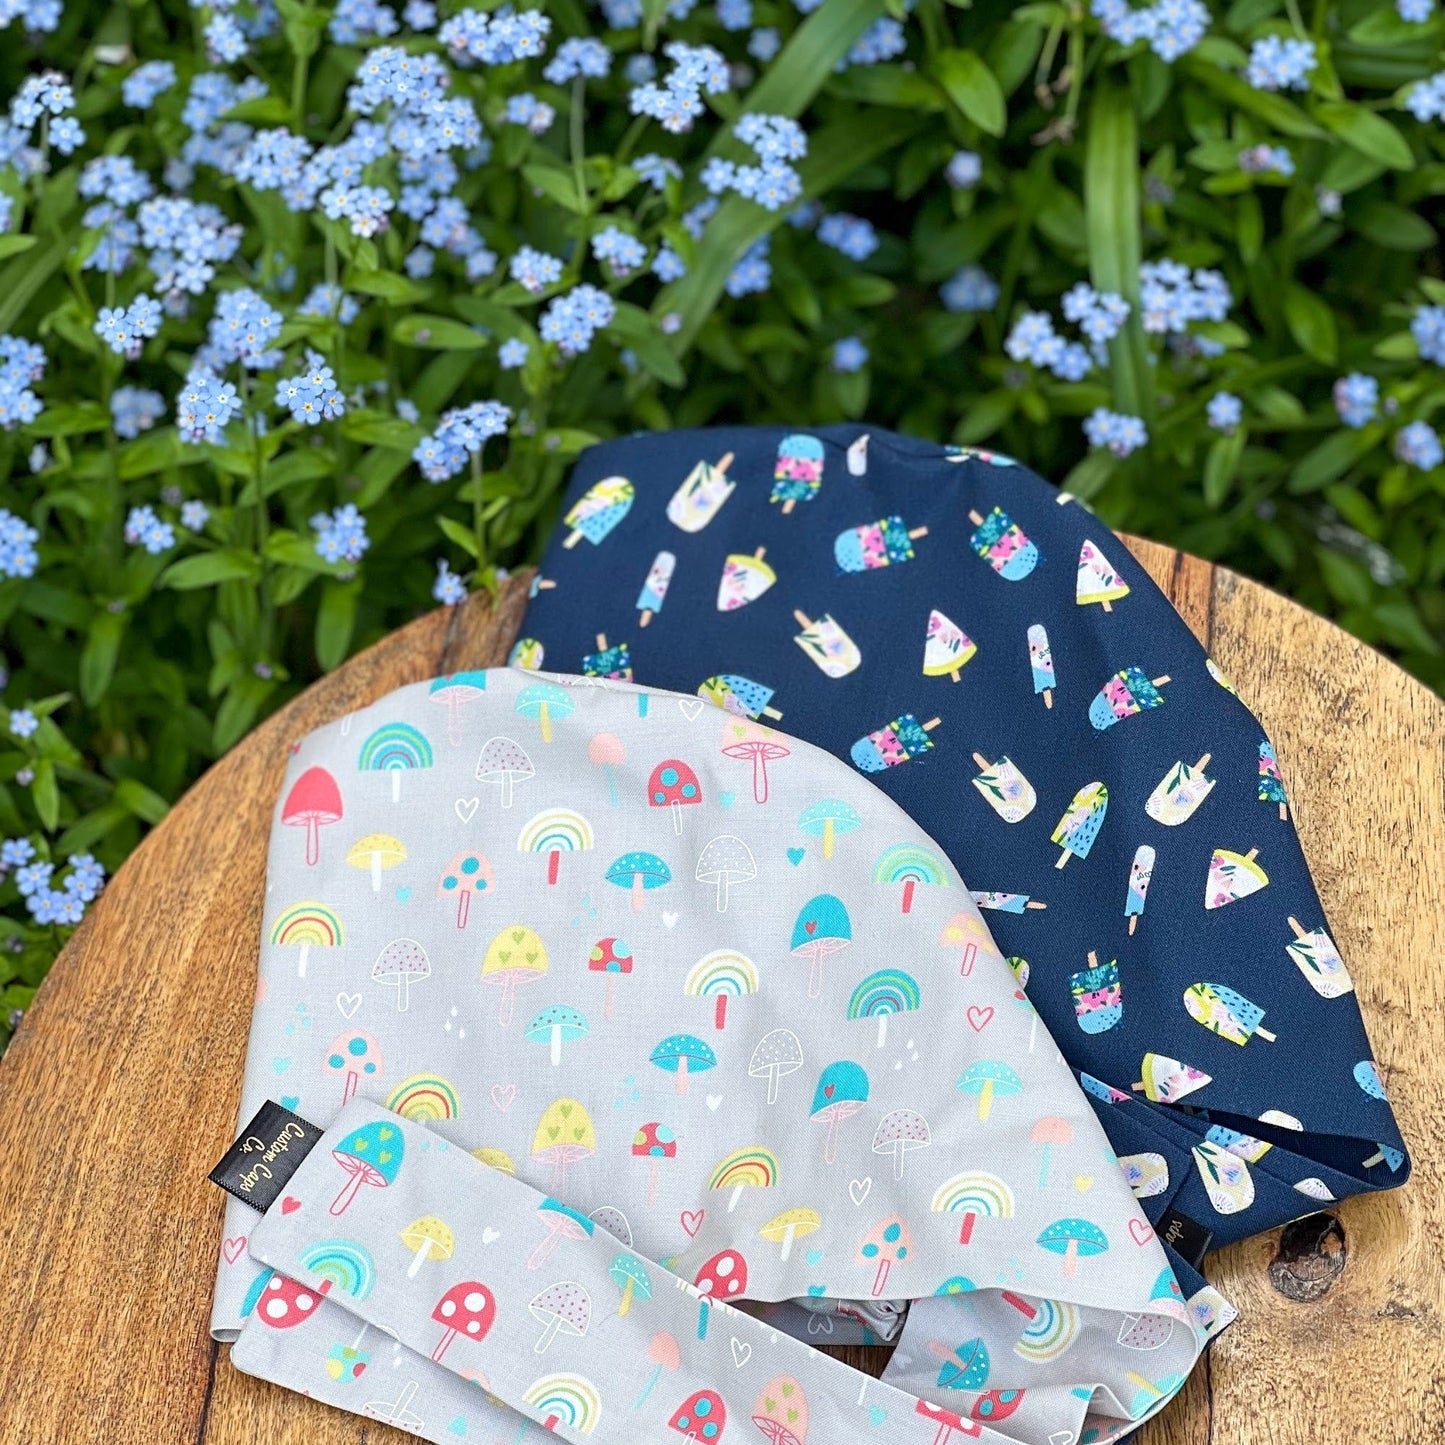 Floral Popsicles on Navy | Pixie - Custom Caps Co. 